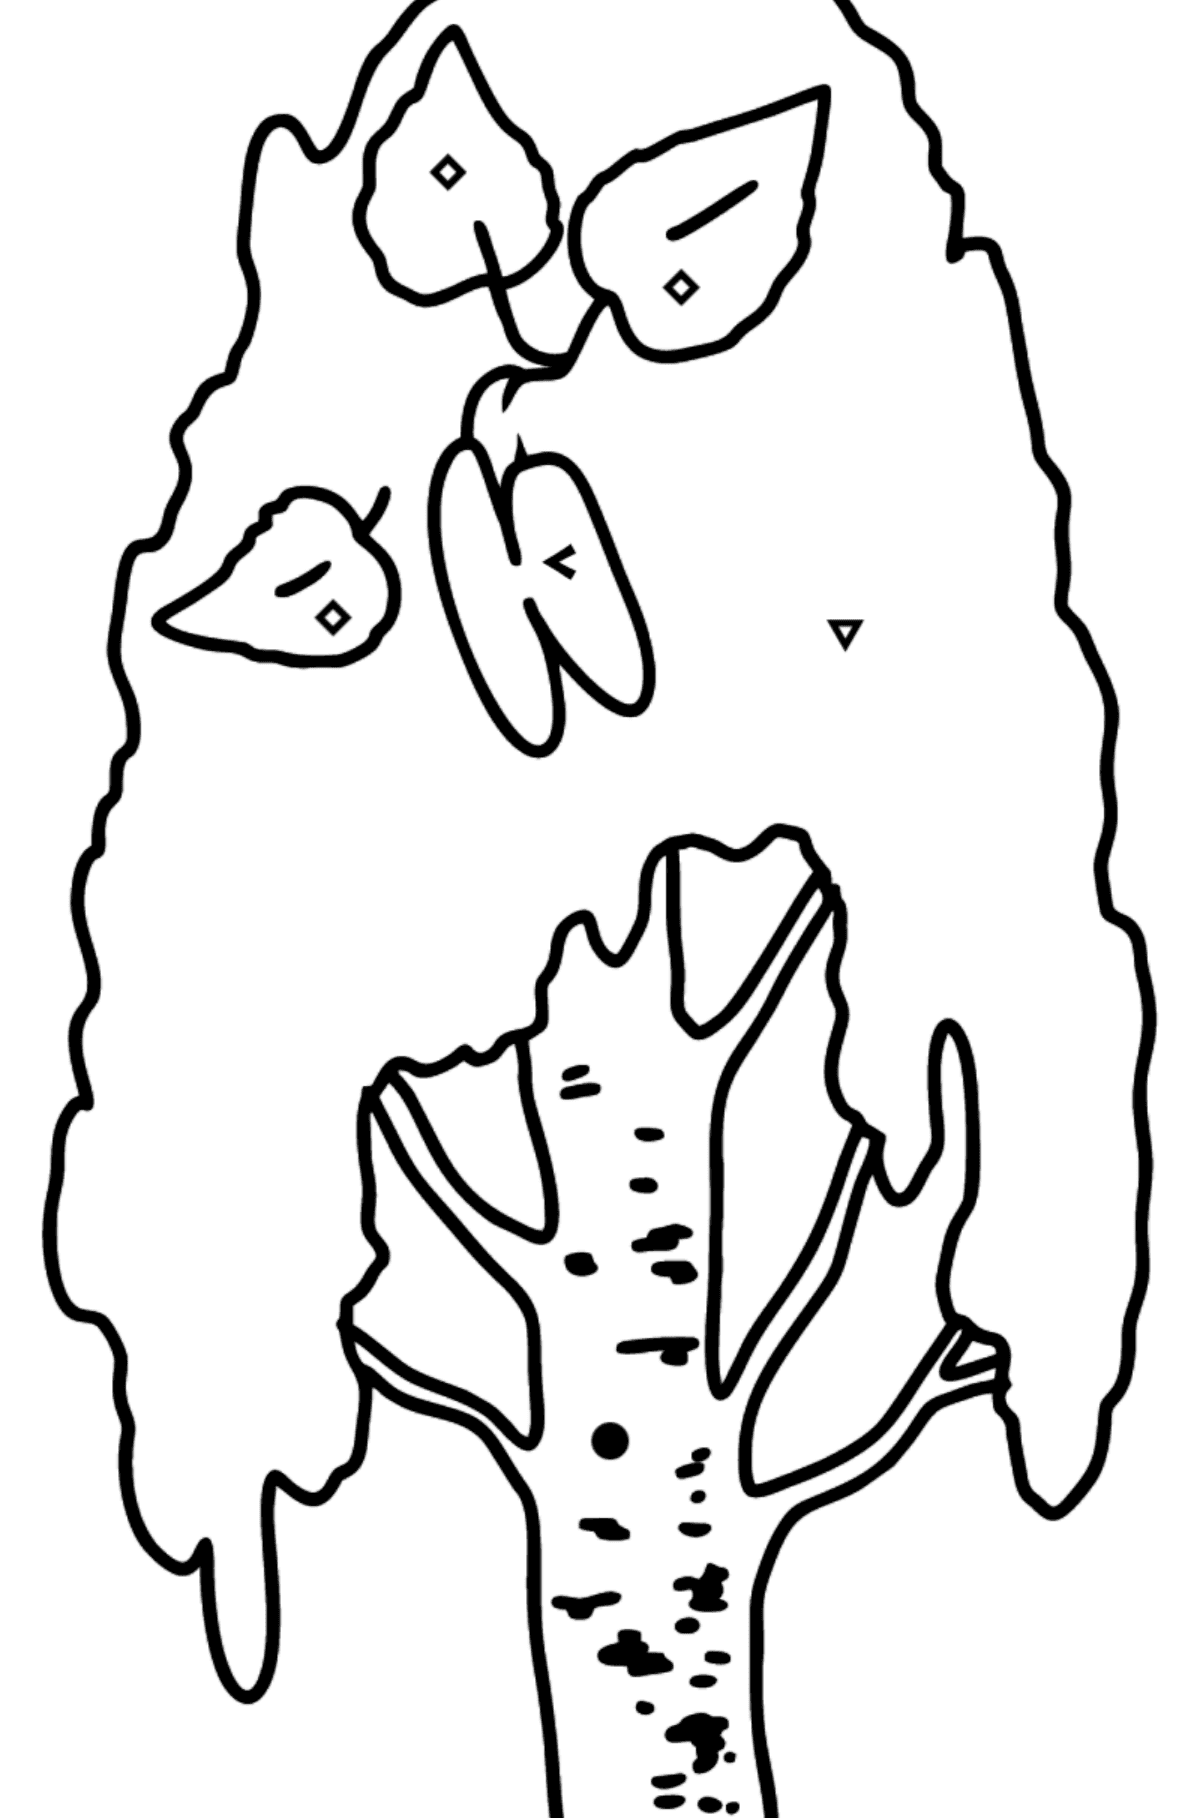 Birch coloring page - Coloring by Symbols for Kids